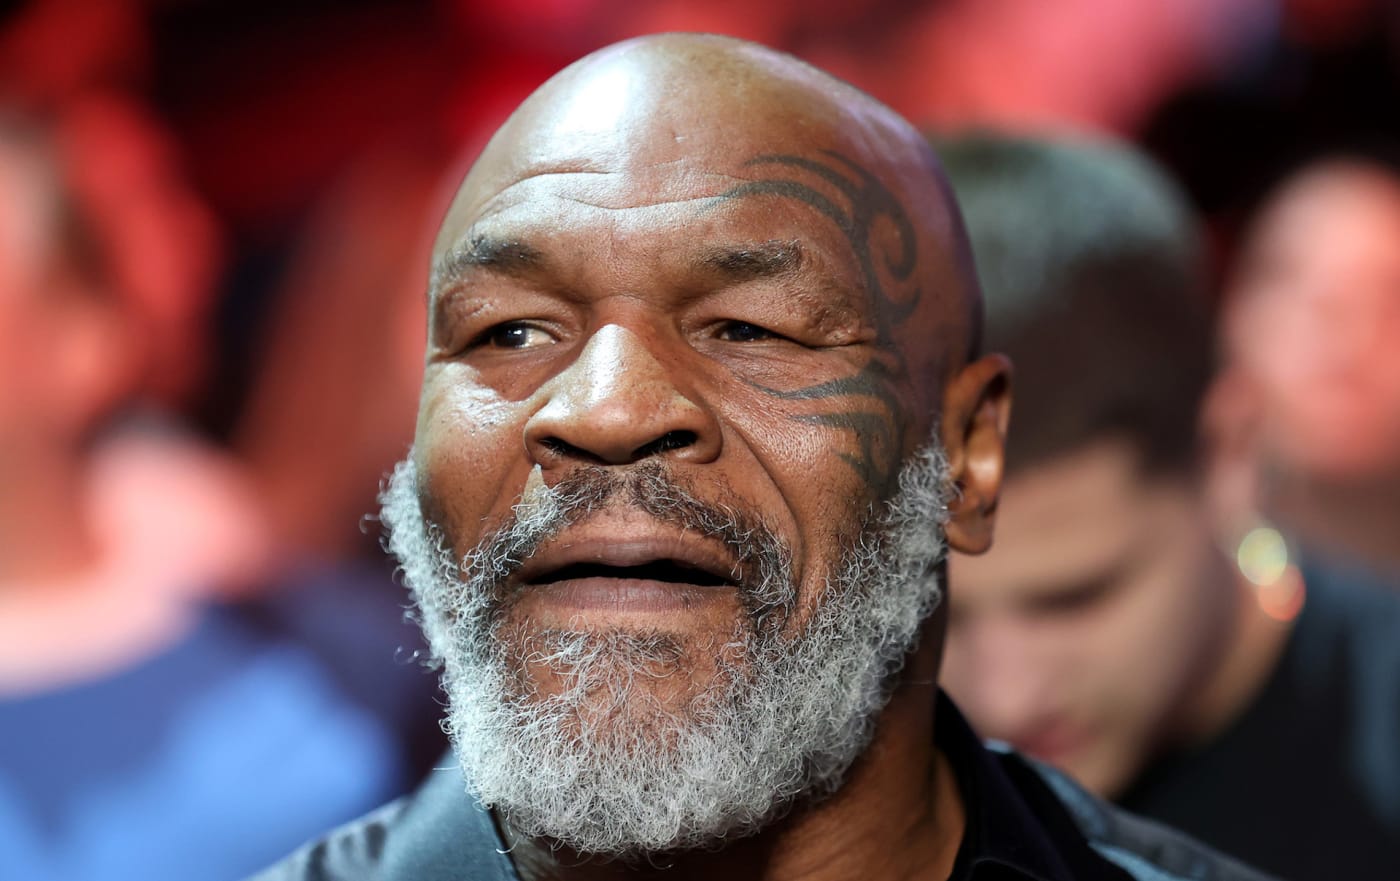 Mike Tyson faces a $5 million lawsuit for allegedly raping a woman in the 1990s